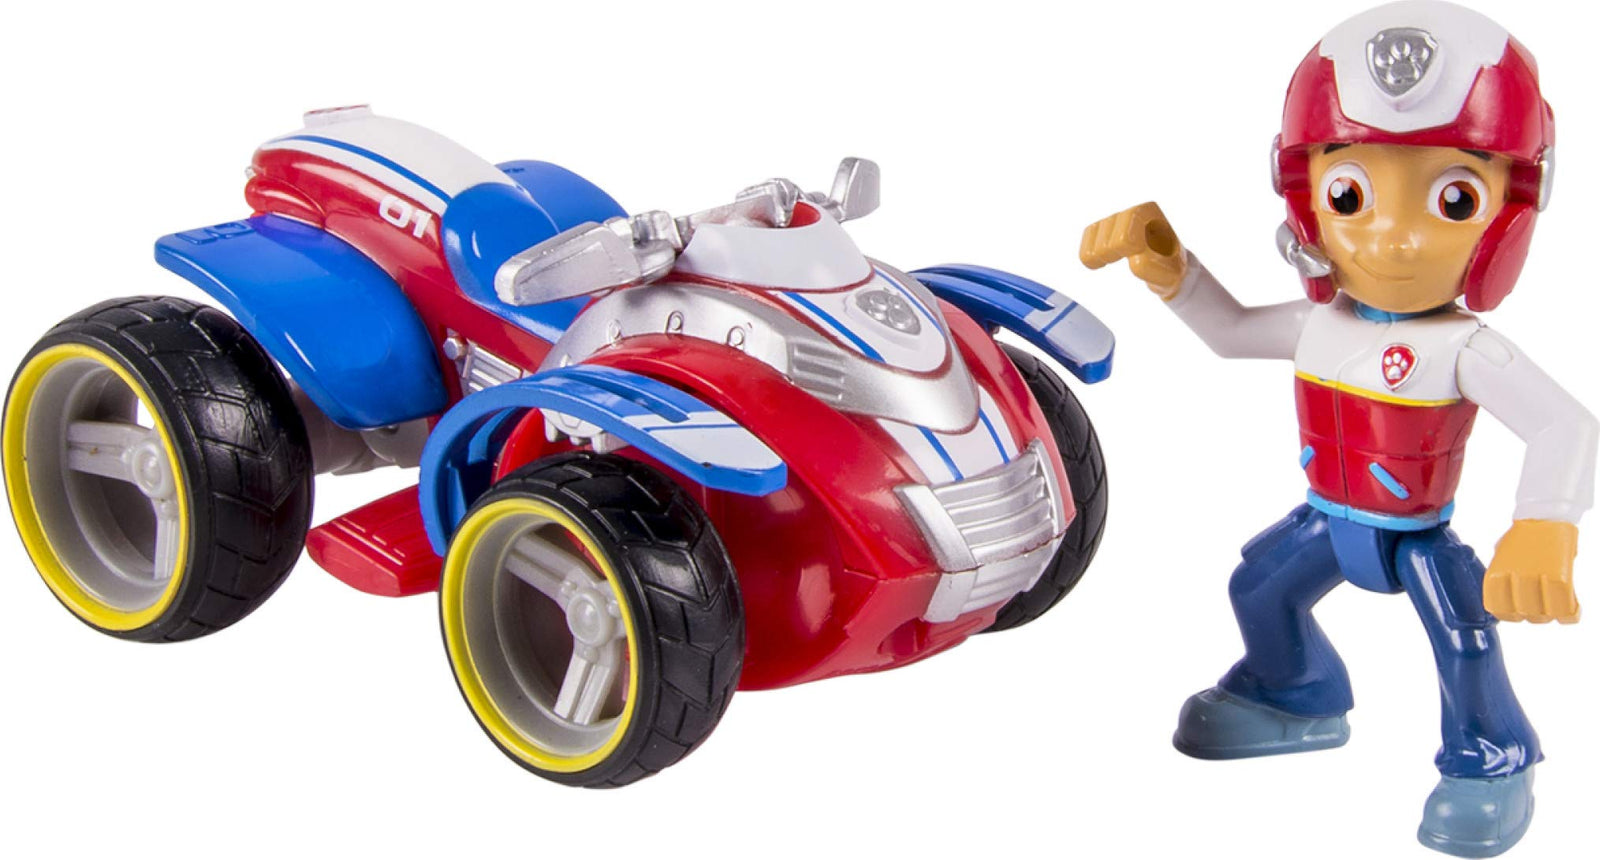 Paw Patrol Ryder's Rescue ATV, Vechicle and Figure